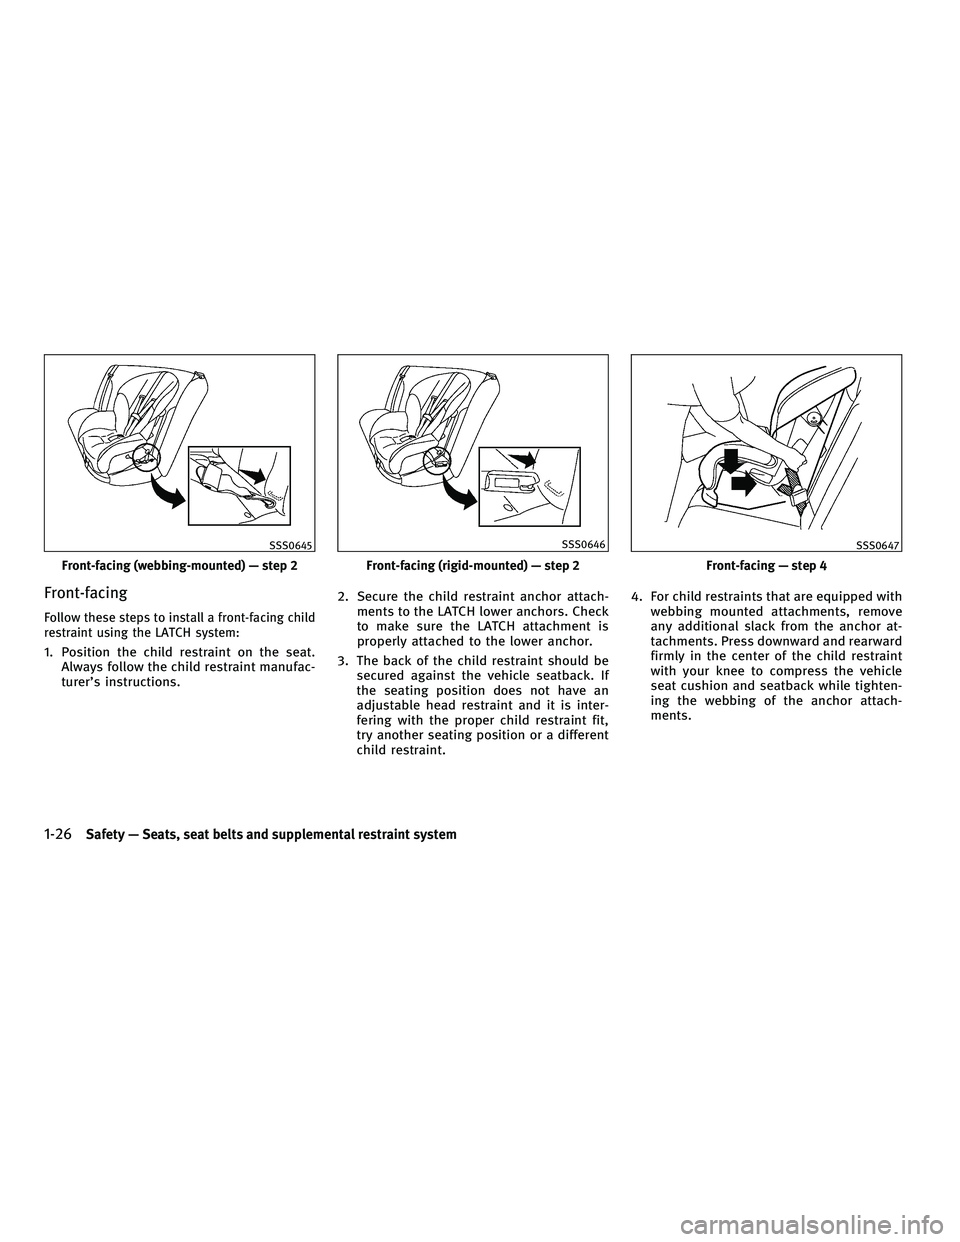 INFINITI G 2010 Service Manual Front-facing
Follow these steps to install a front-facing child
restraint using the LATCH system:
1. Position the child restraint on the seat.Always follow the child restraint manufac-
turer’s instr